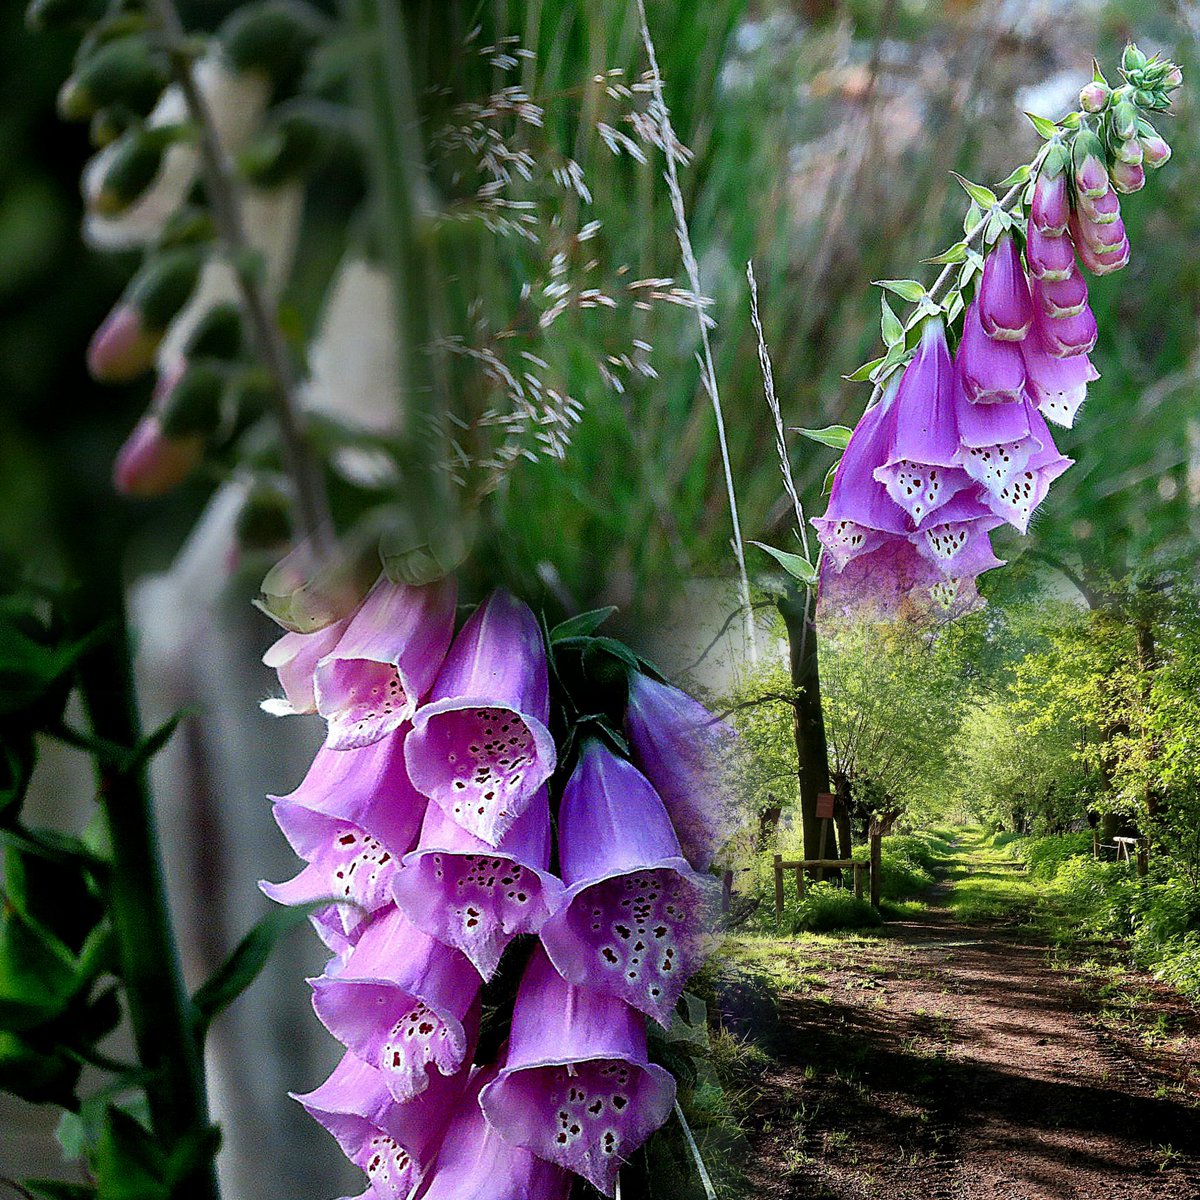 New day, new path...hope you can enjoy it   💚💜
' I close my eyes in order to see '      * Paul Gauguin
#NatureMagic #foxgloves #Tuesdayvibe #collageart